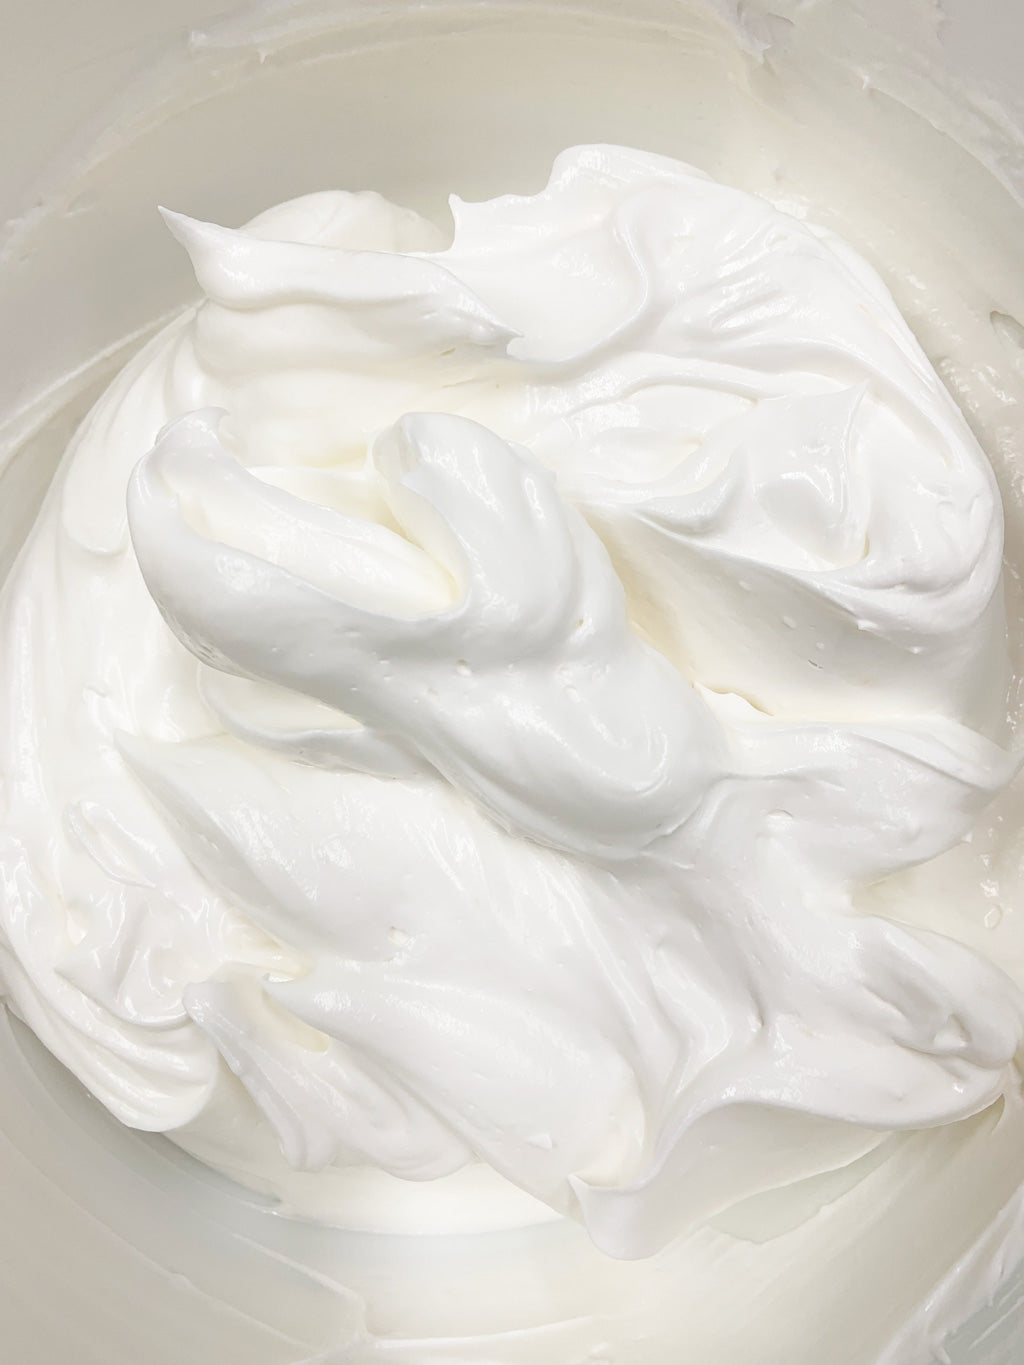 Whipped body butter vs. lotion by Vermont Lavender LLC Diane Maurice